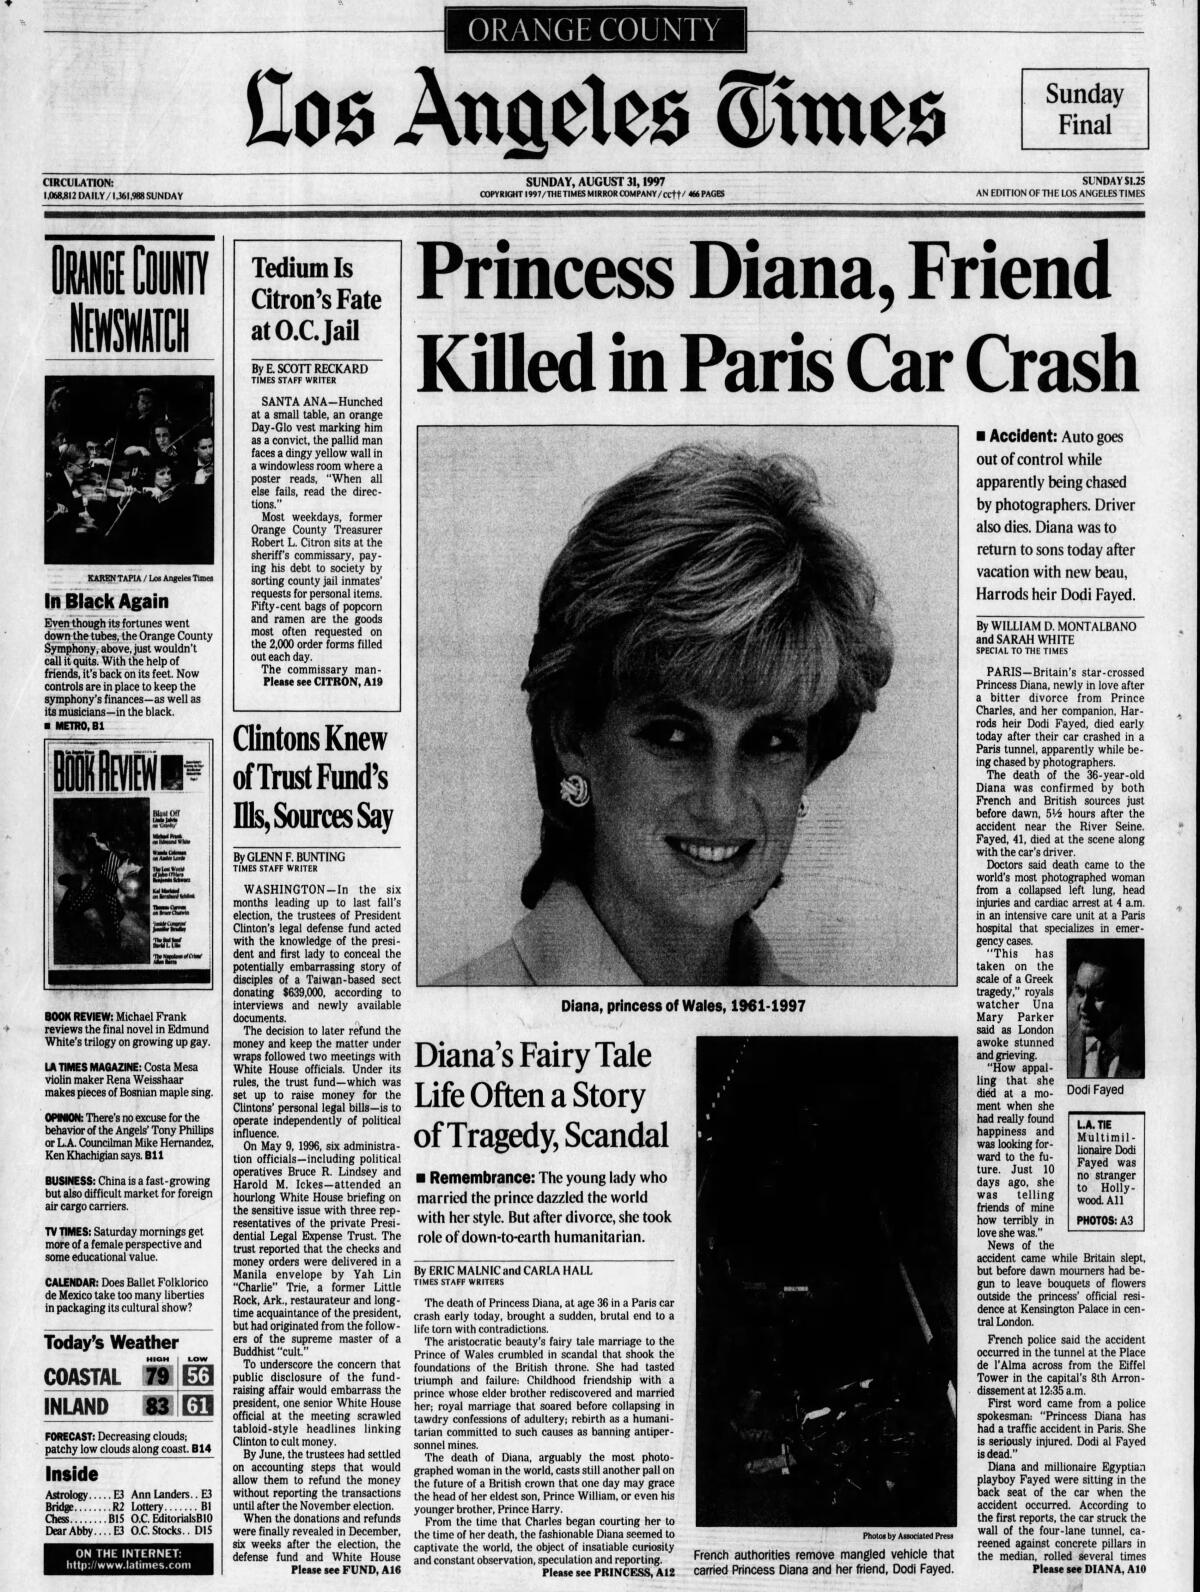 A 1997 Los Angeles Times newspaper clipping, chronicling the death of Princess Diana